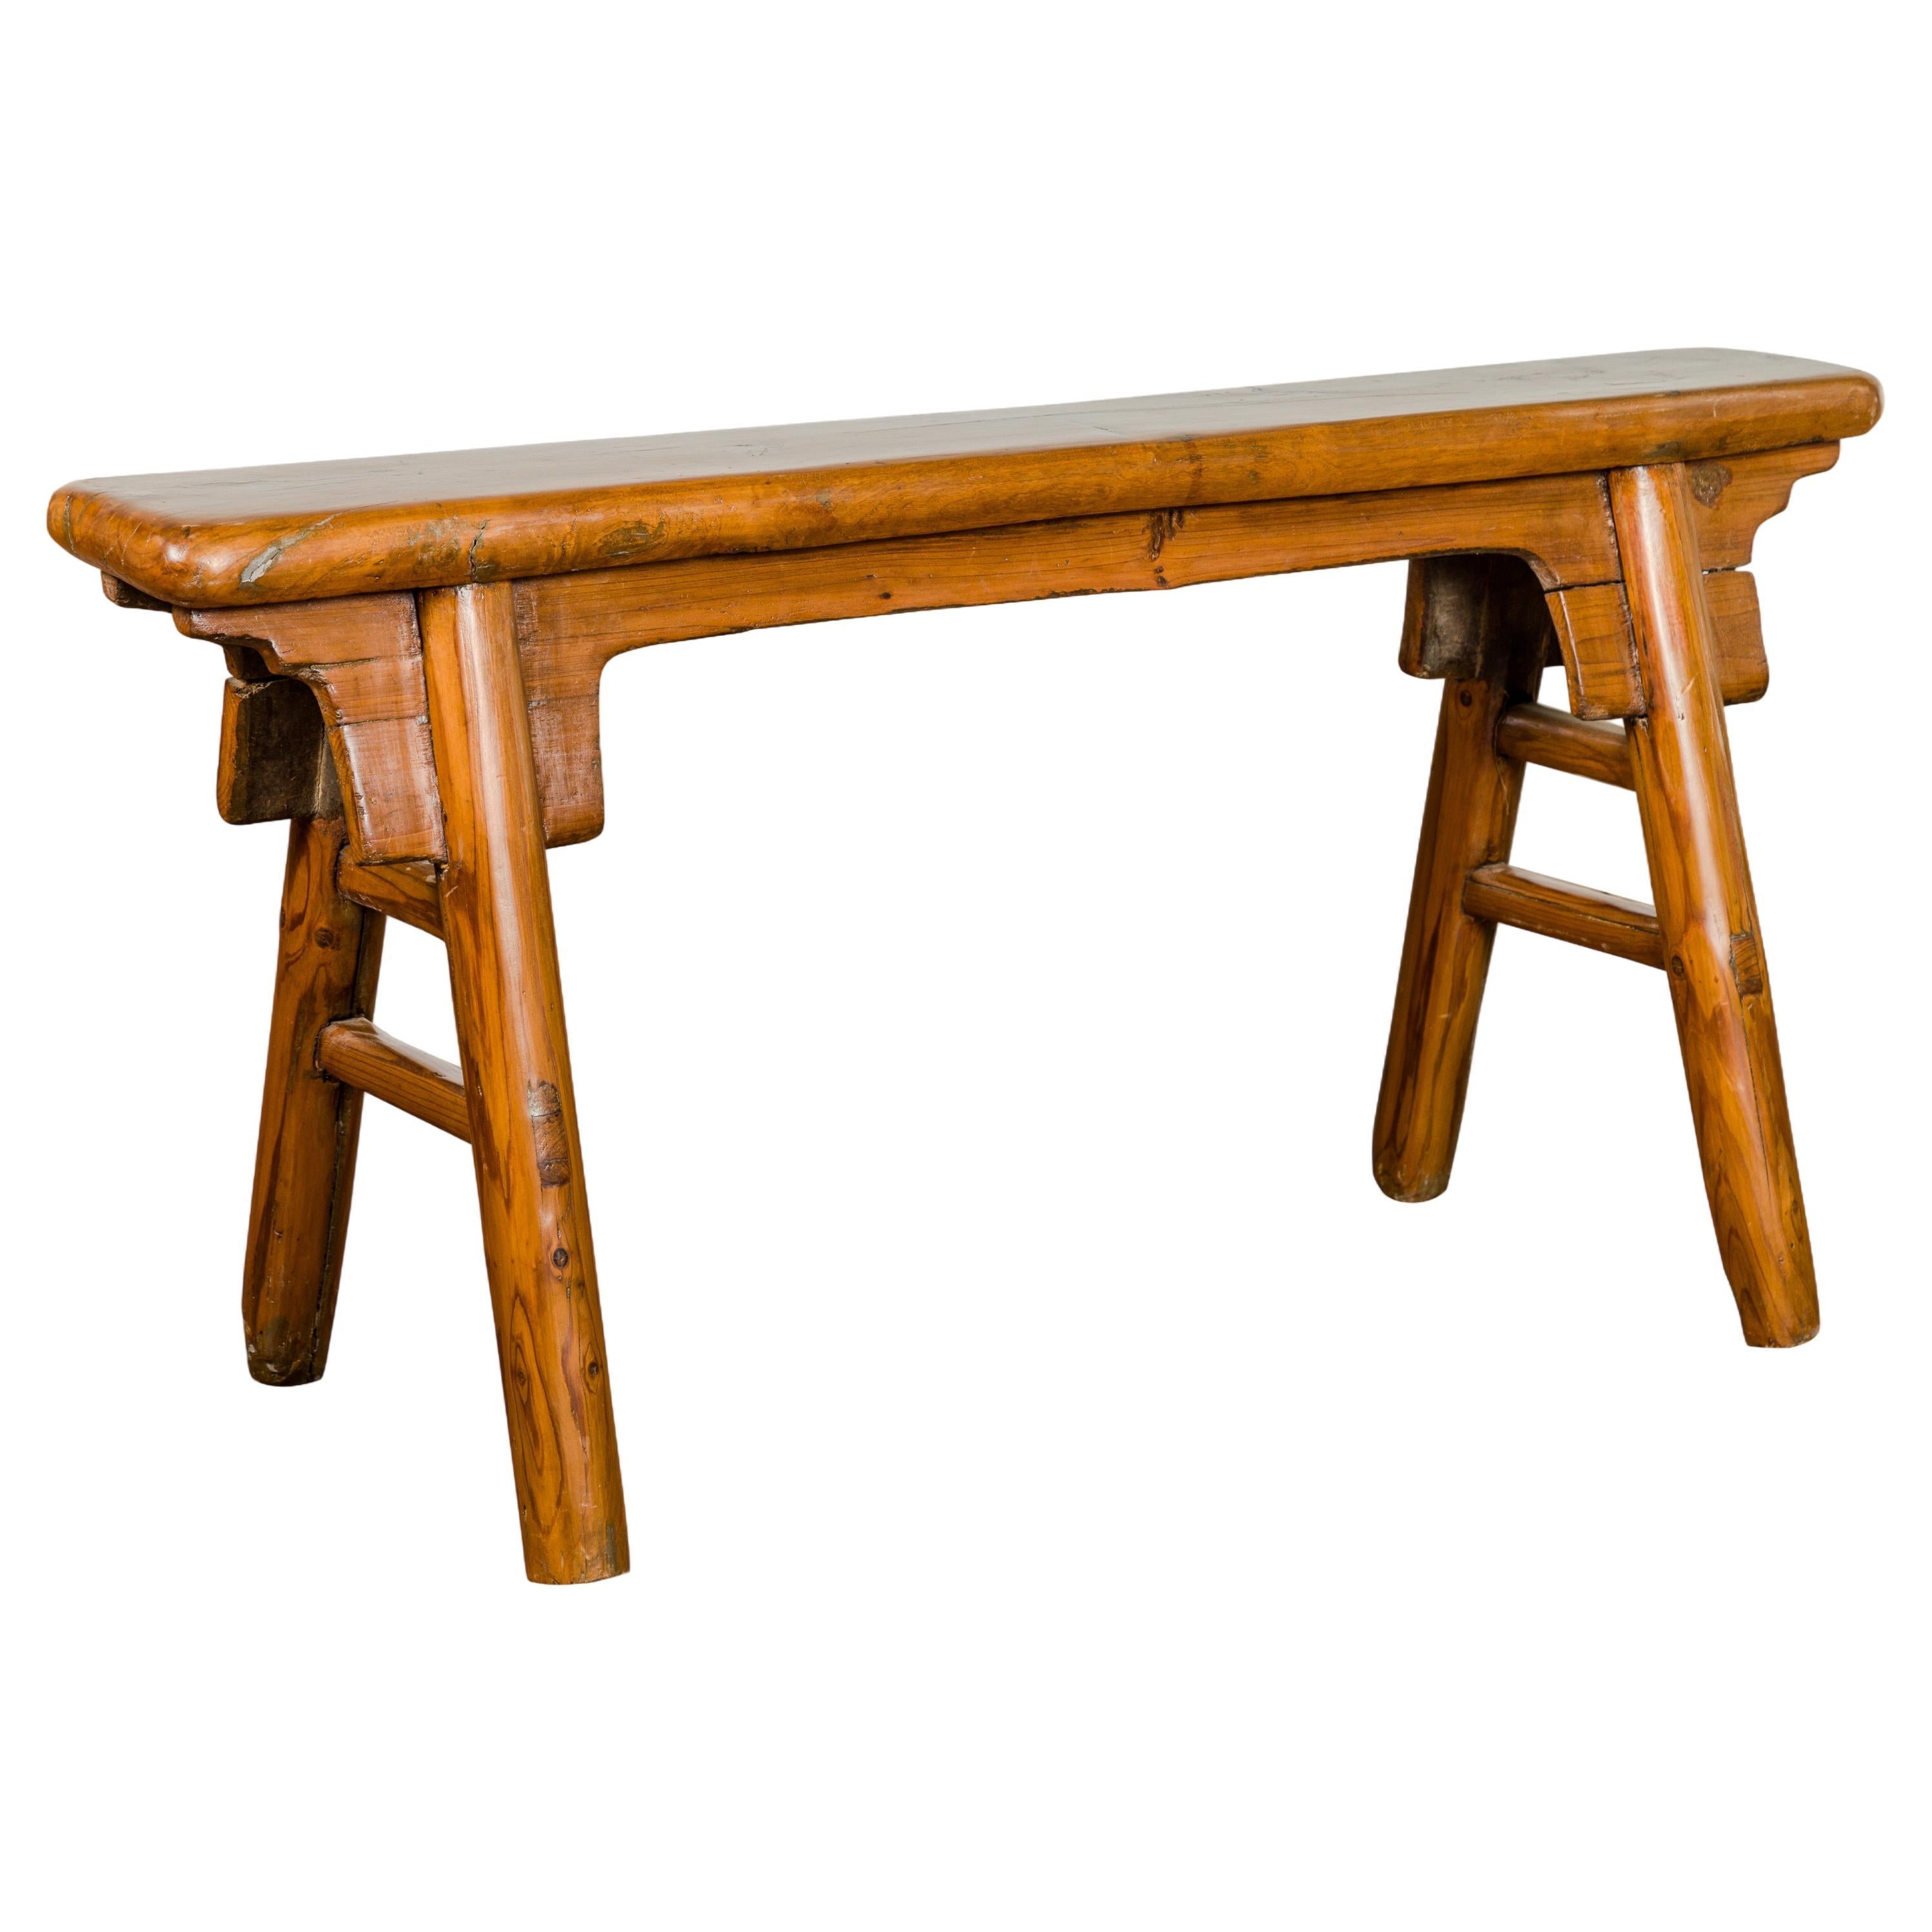 Small Vintage A-Frame Wooden Bench with Rustic Appearance and Splaying Legs For Sale